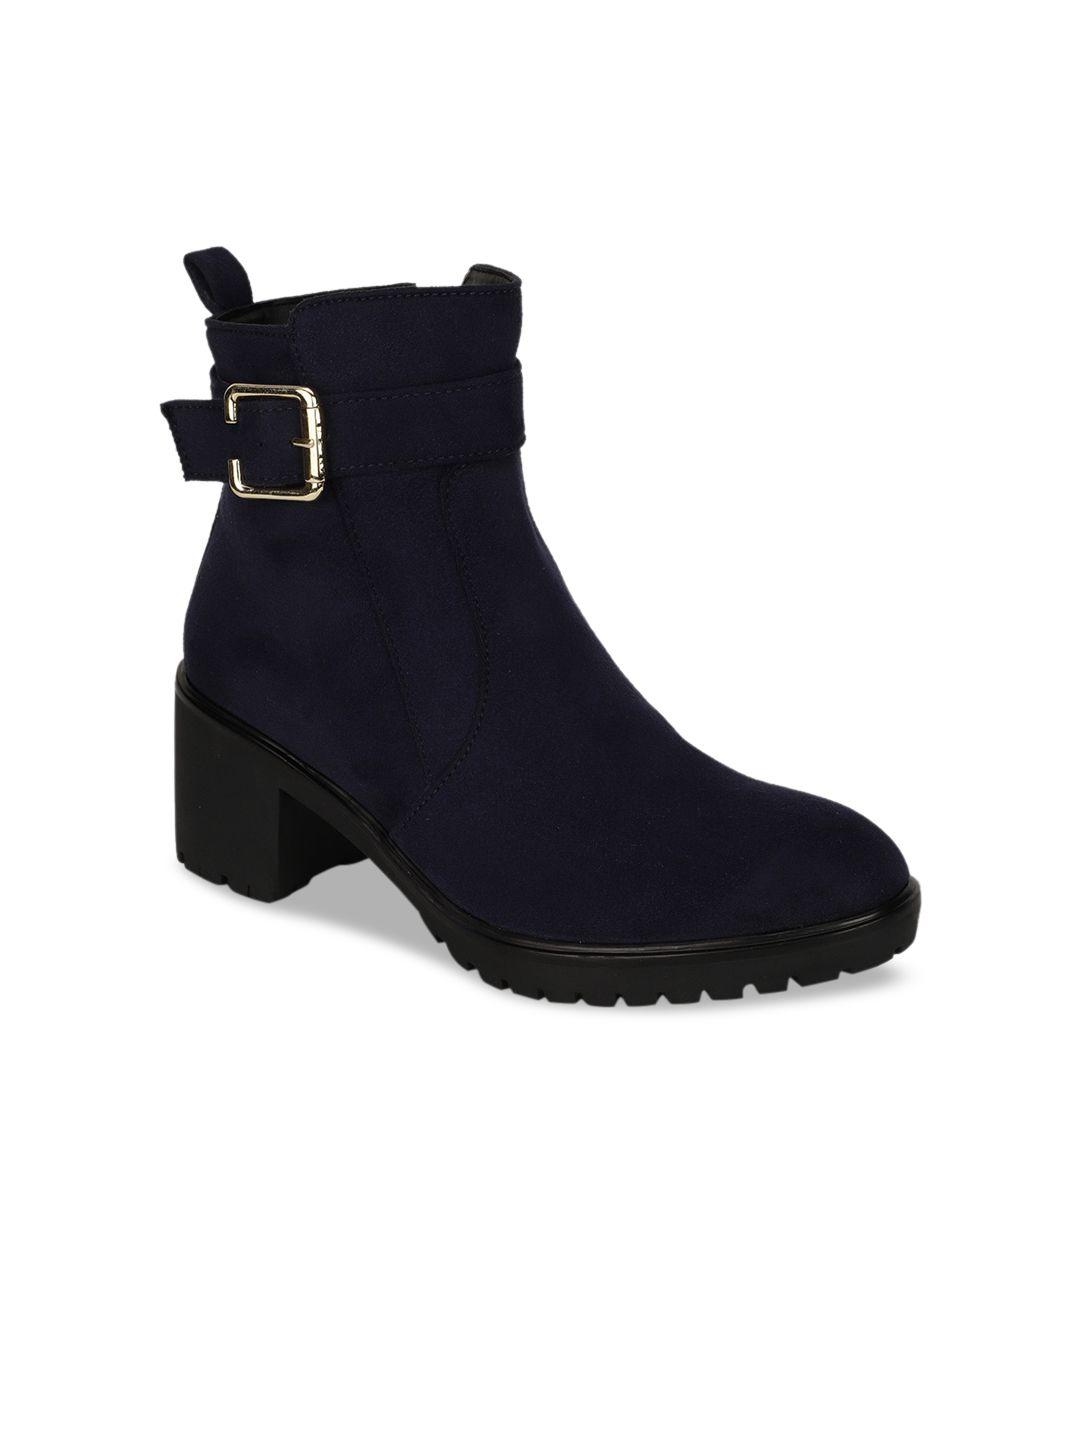 bruno manetti women navy blue suede block heeled boots with buckles